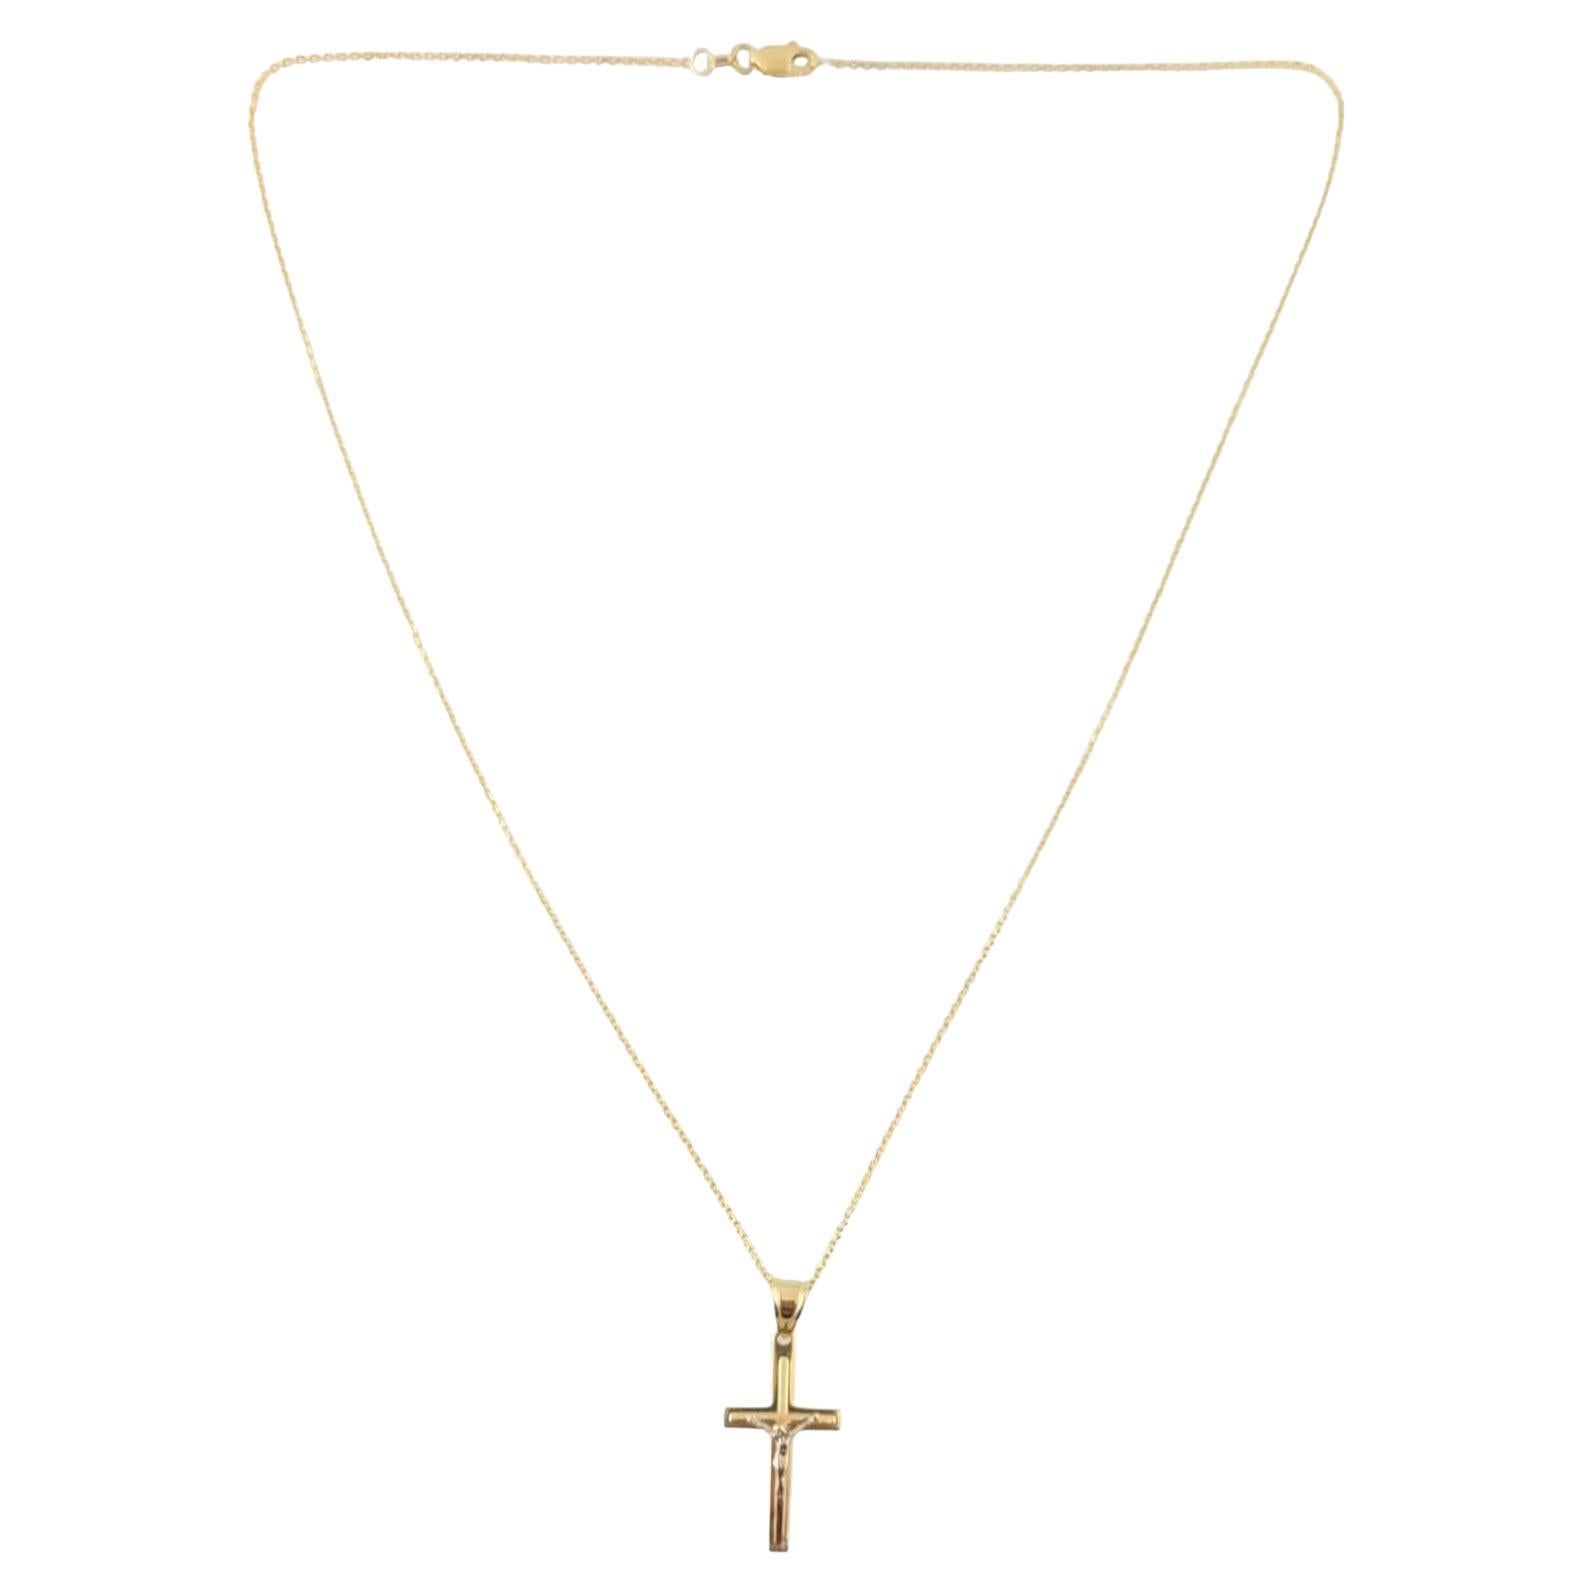  14K Yellow and White Gold Crucifix Pendant Necklace #14976 For Sale